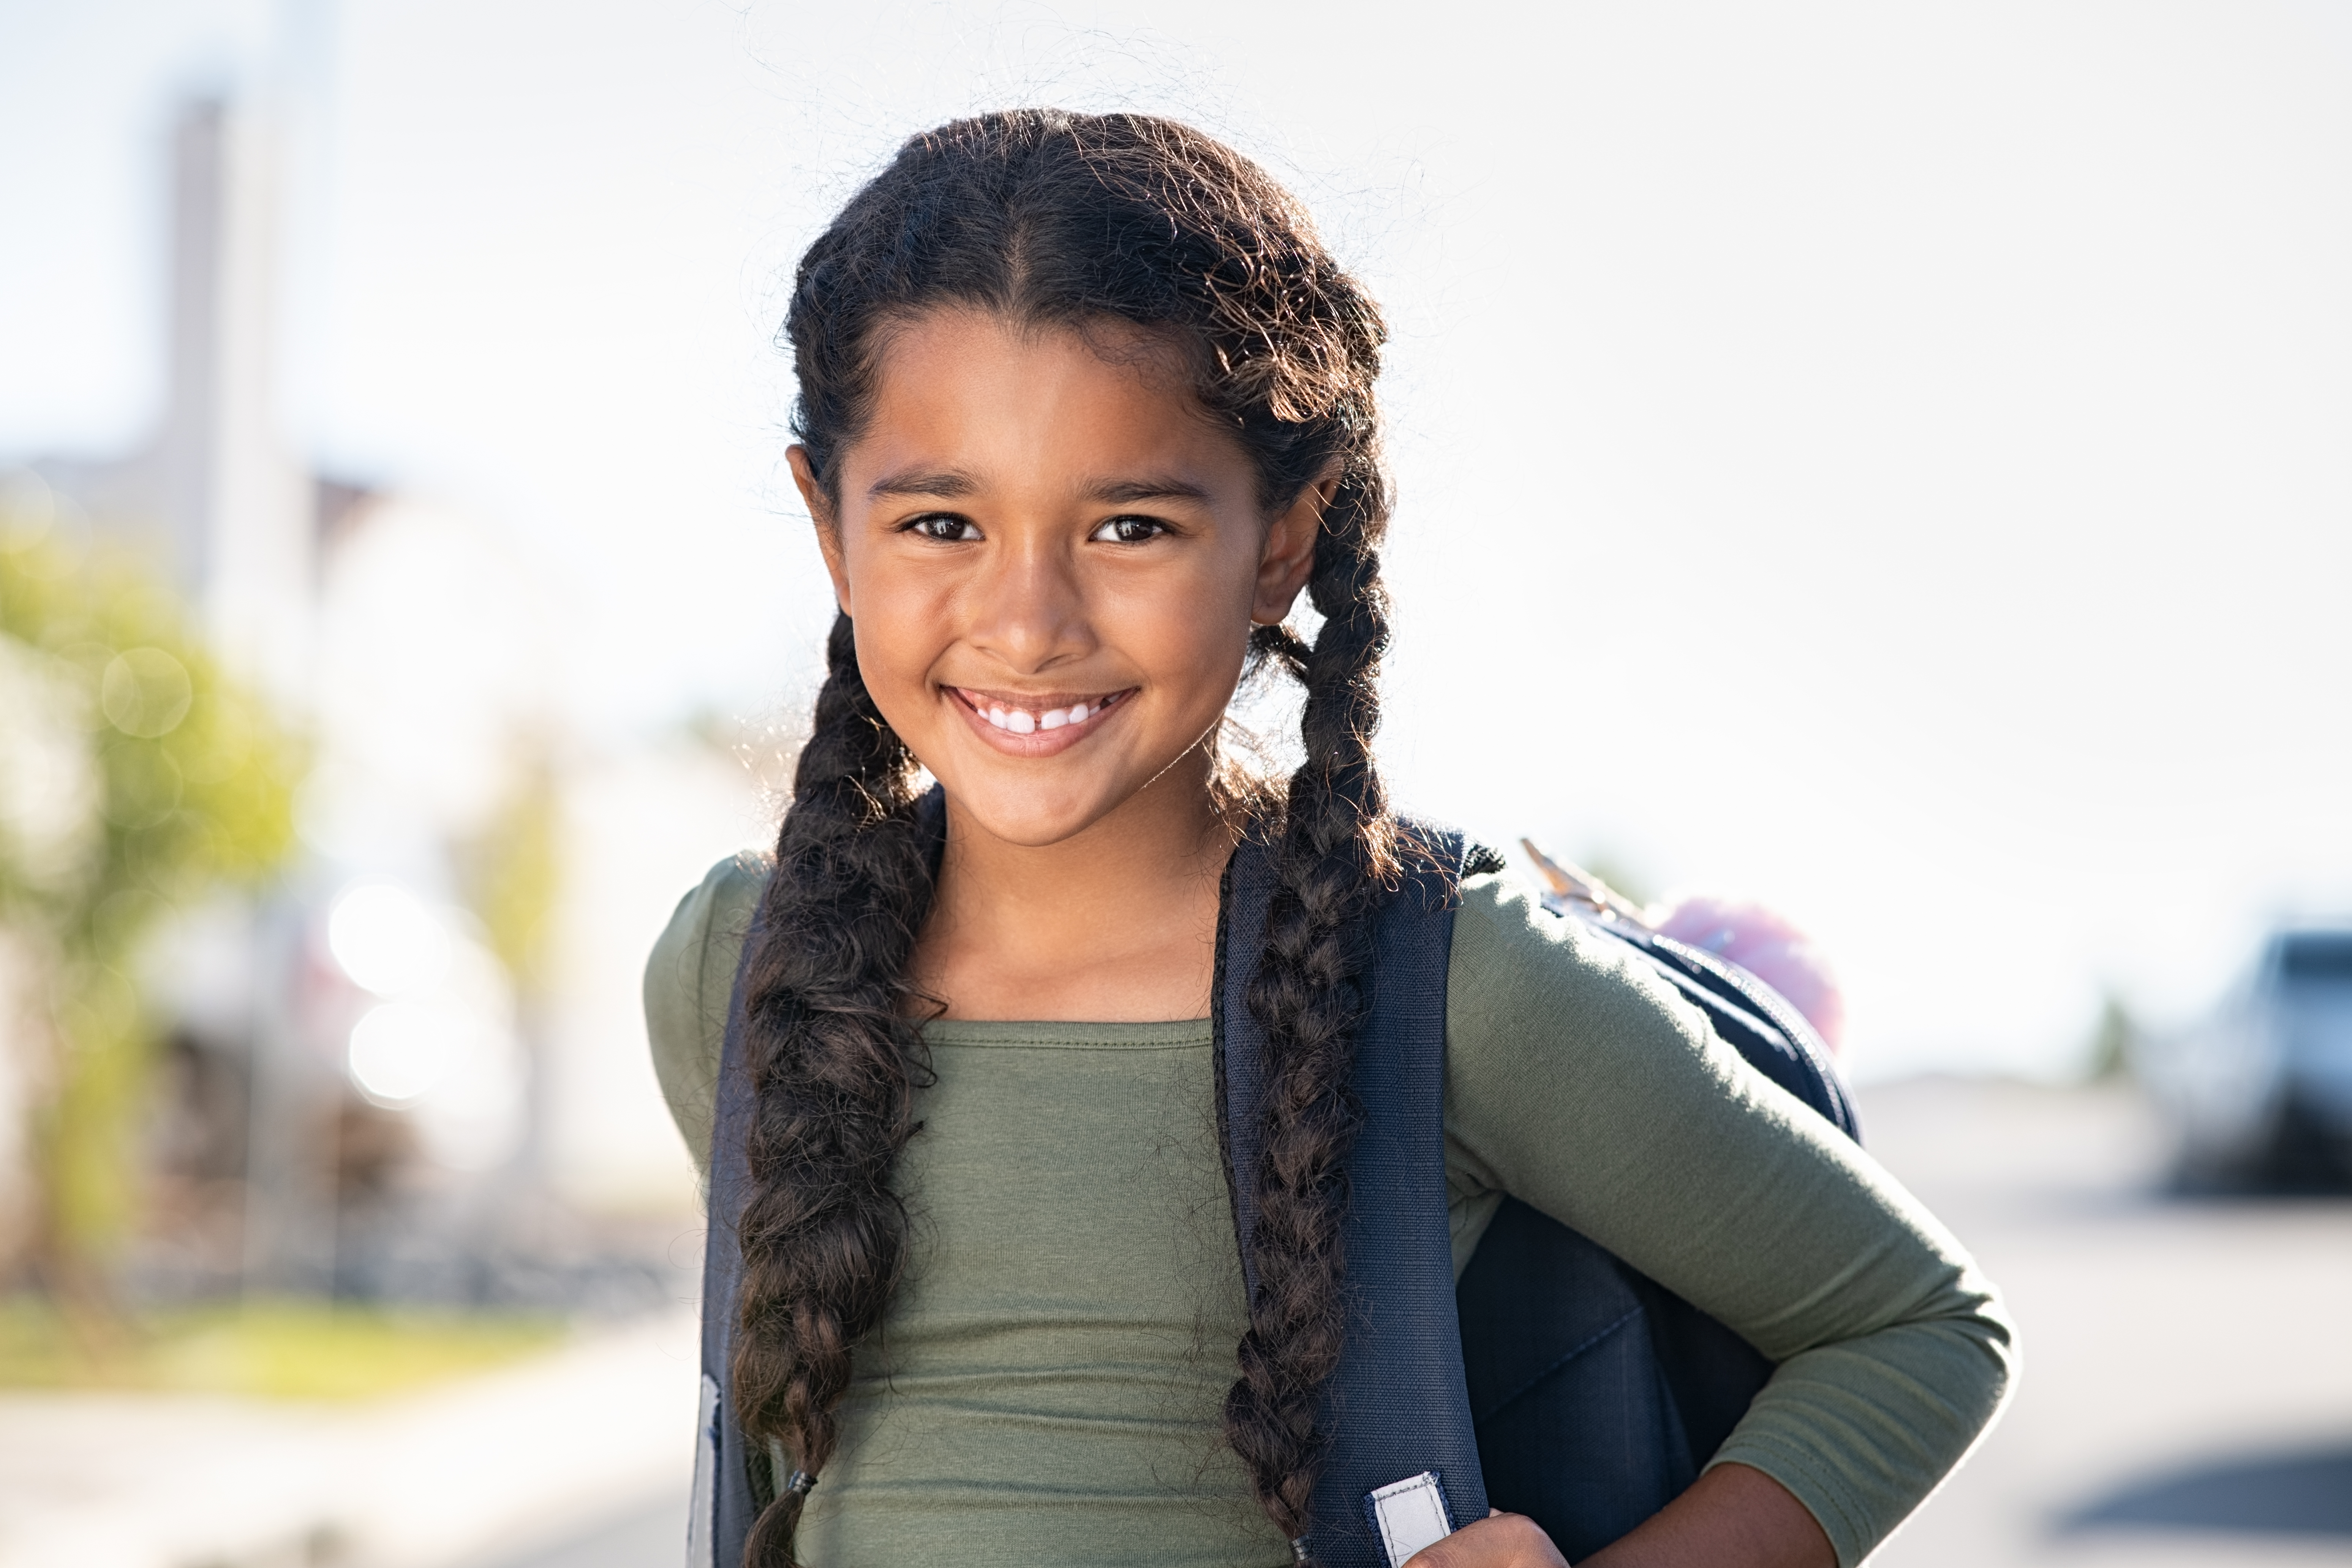 Smiling girl with backpack